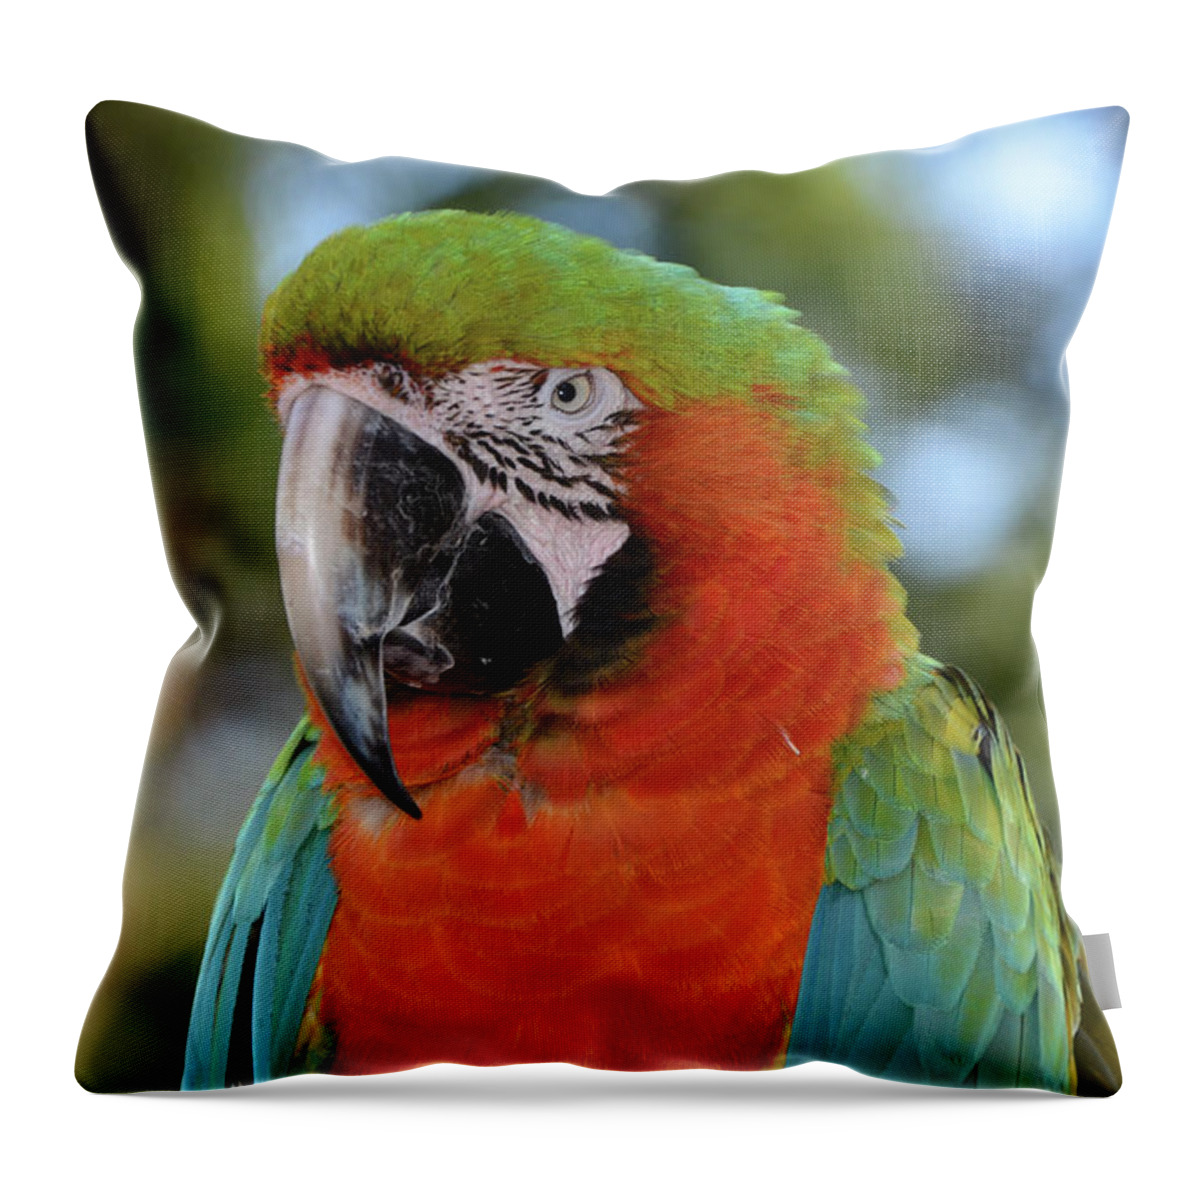 Macaw Throw Pillow featuring the photograph Colorful Macaw Looking Left by Artful Imagery